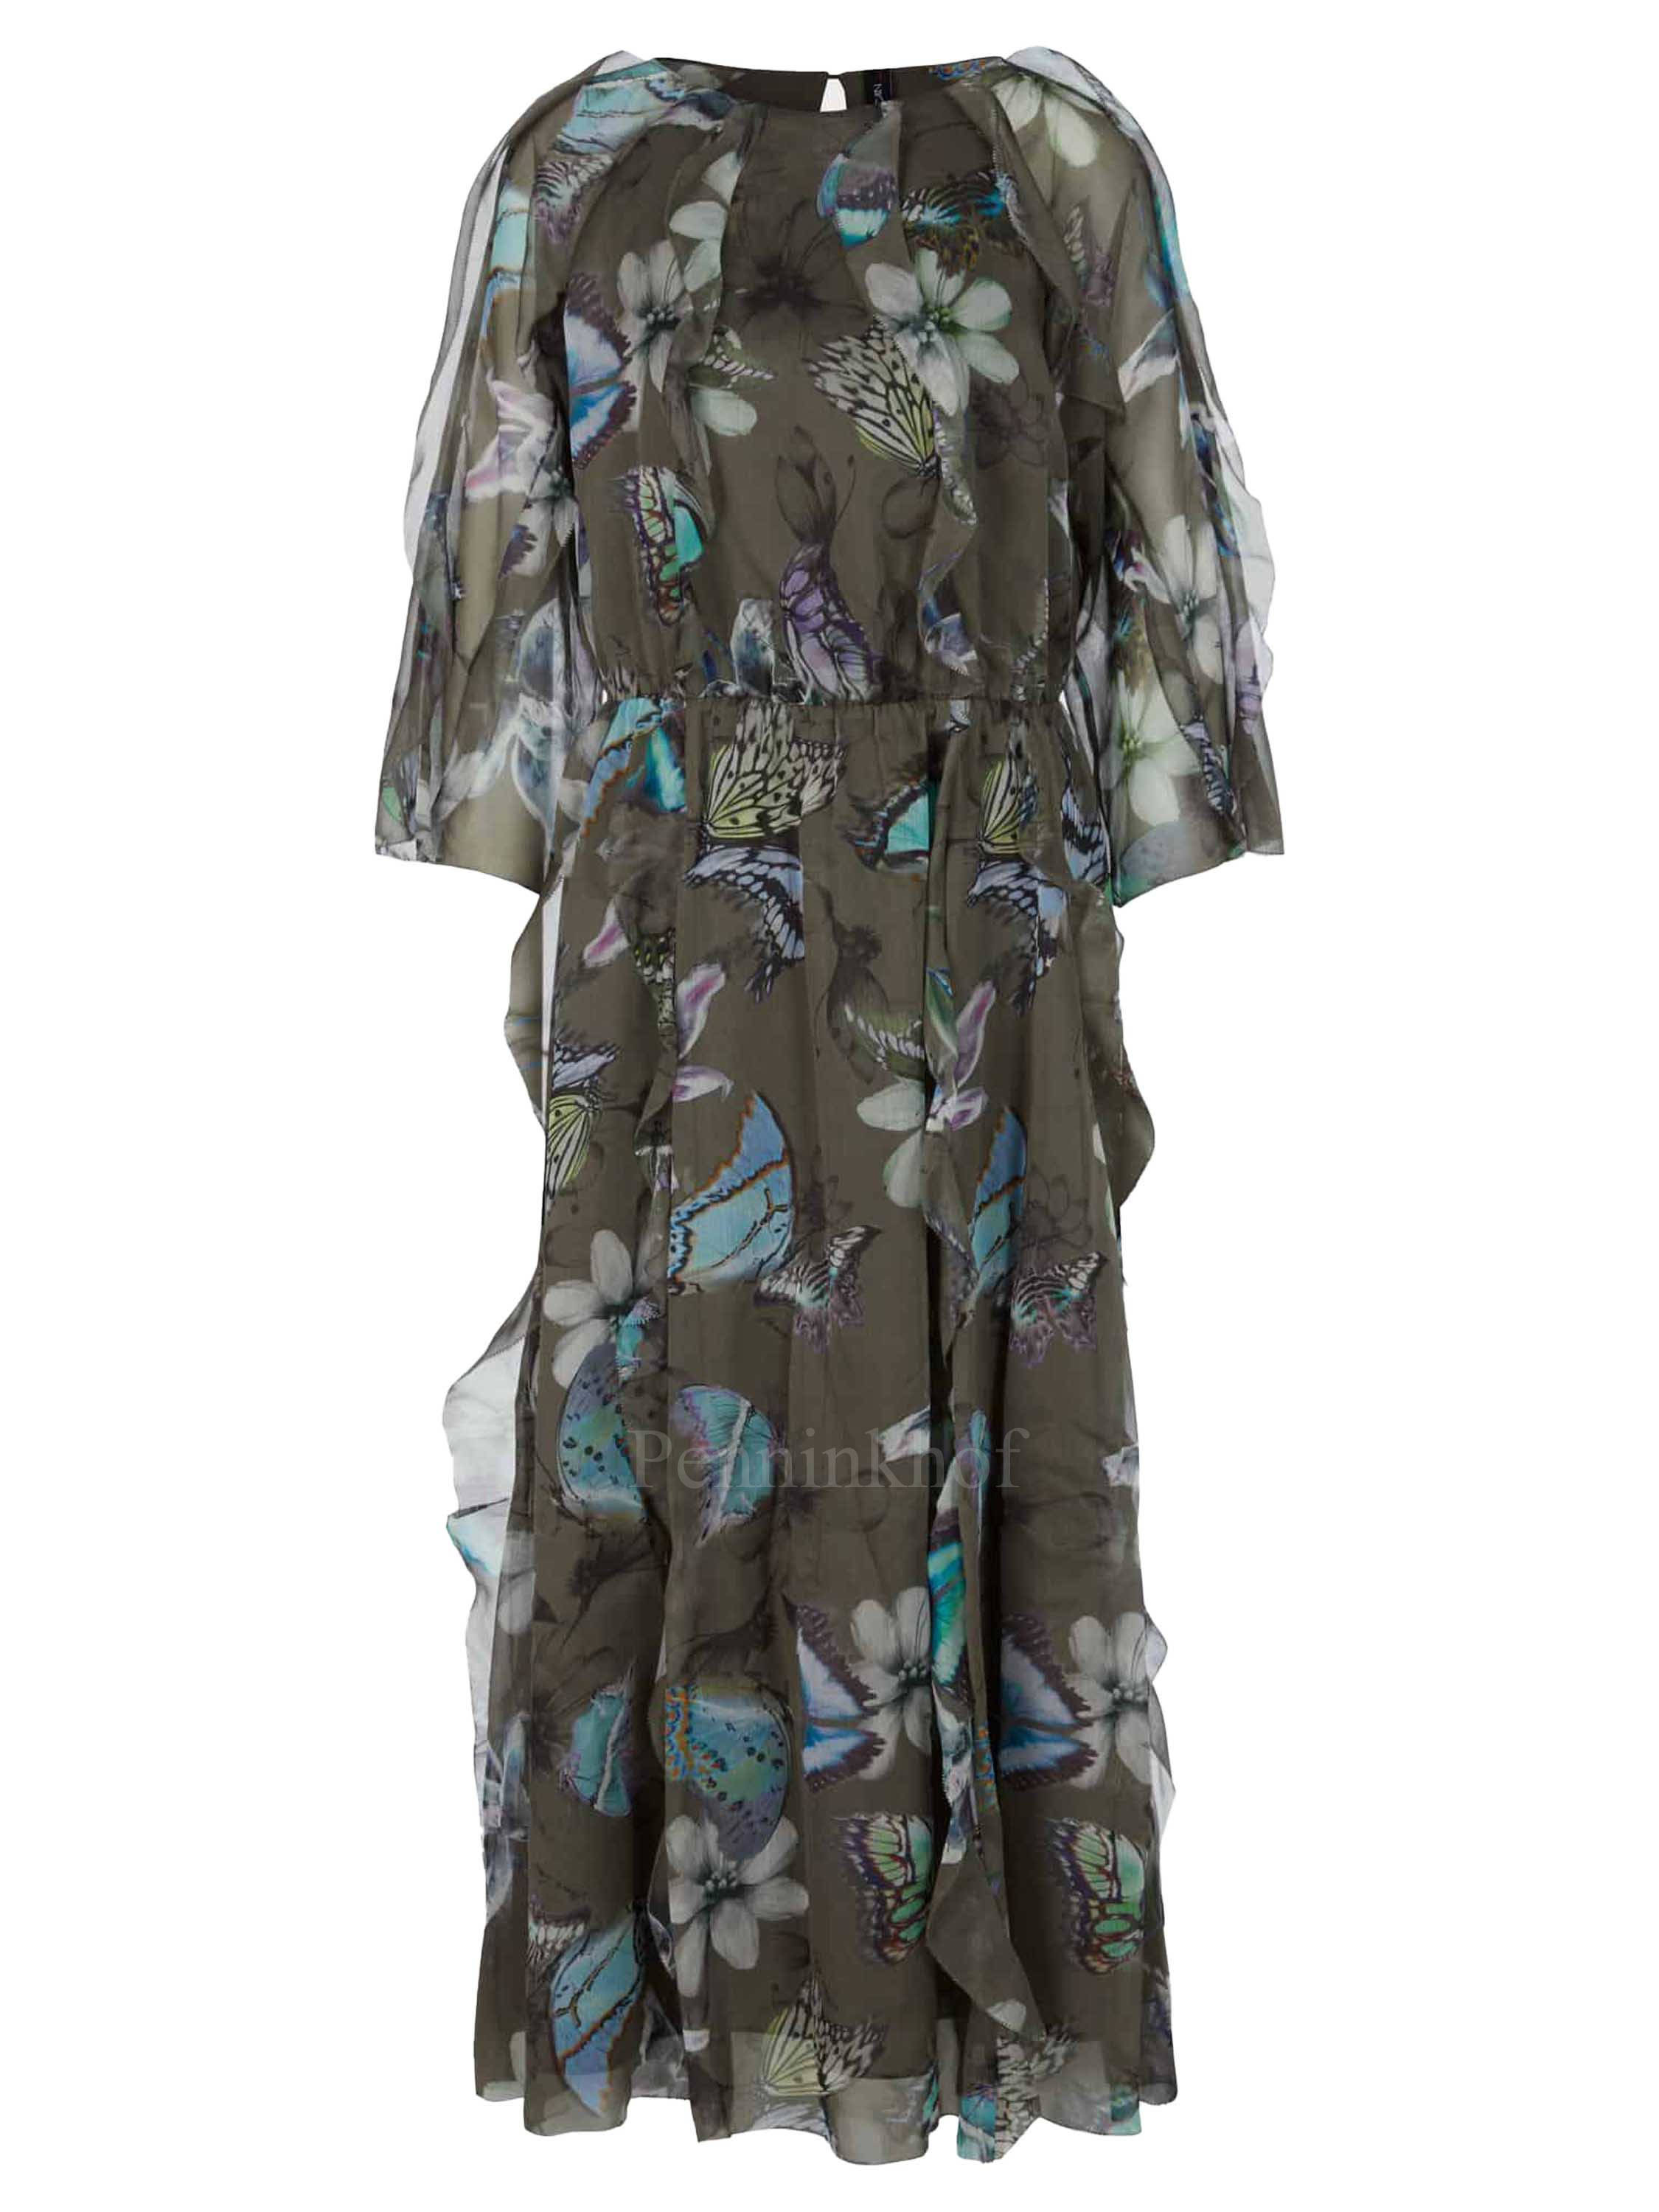 by Marc SC Green W79 21.54 Cain dresses